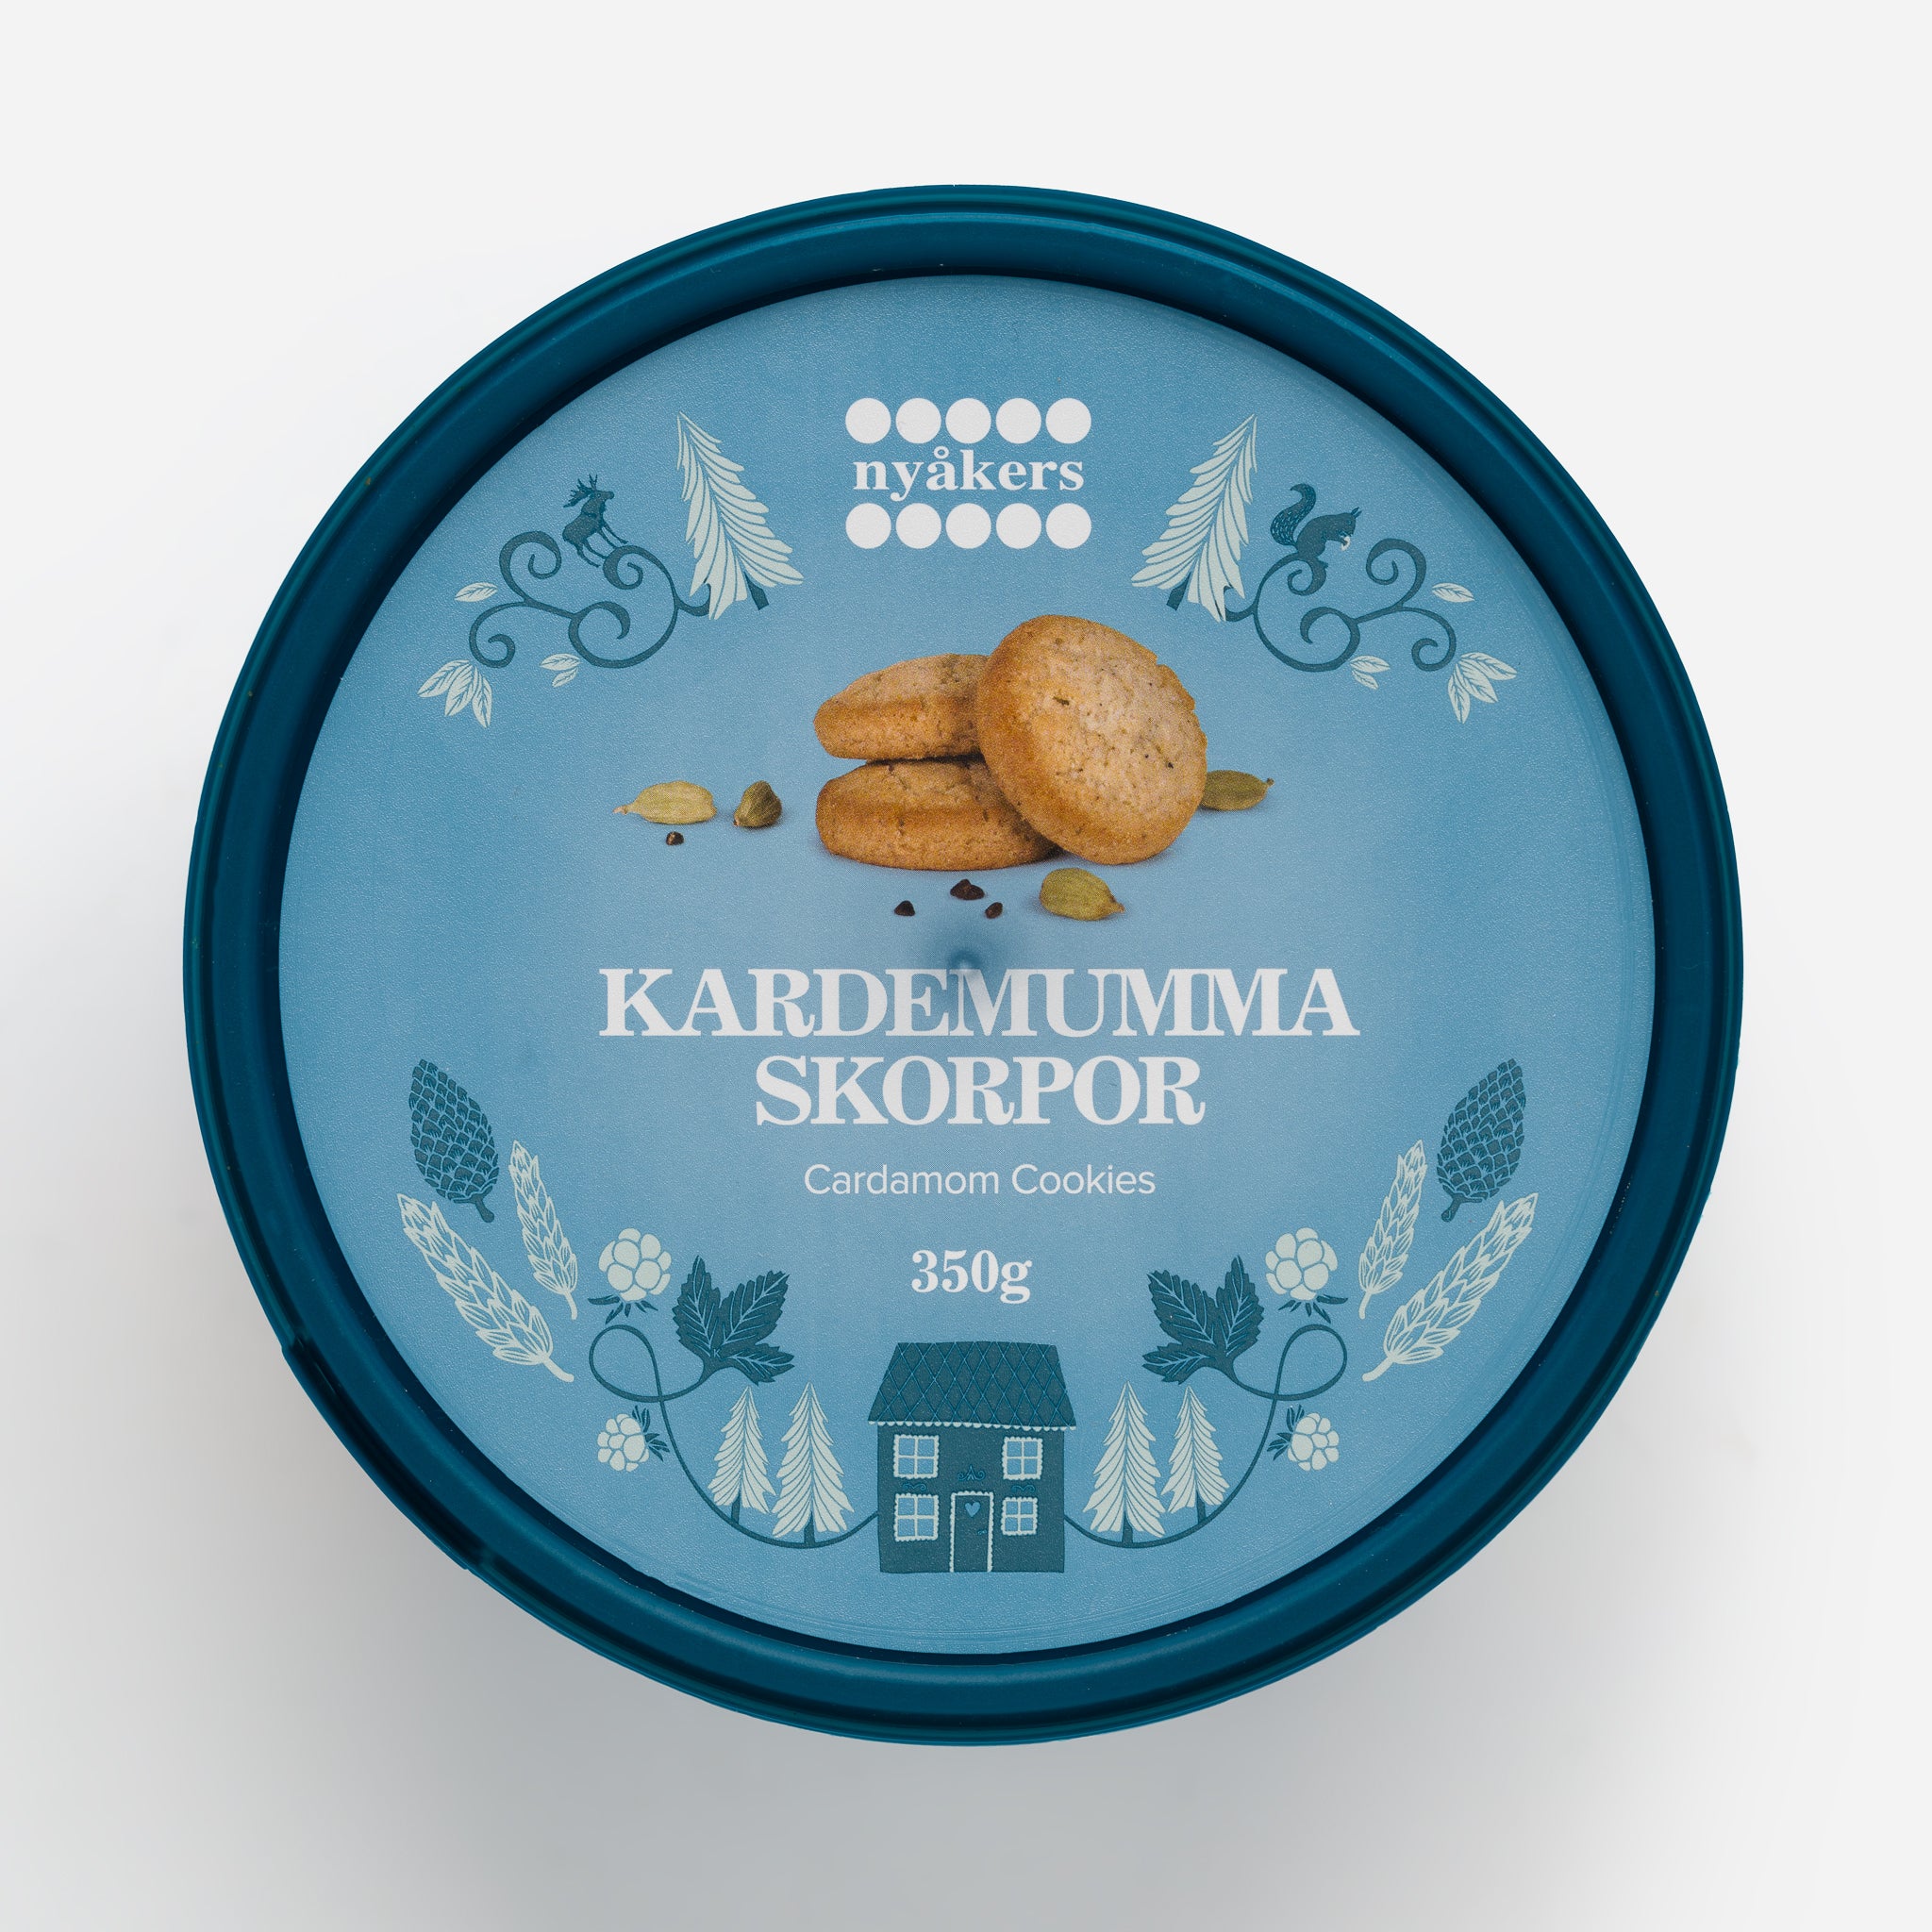 Cardamom Cookies in a Tub